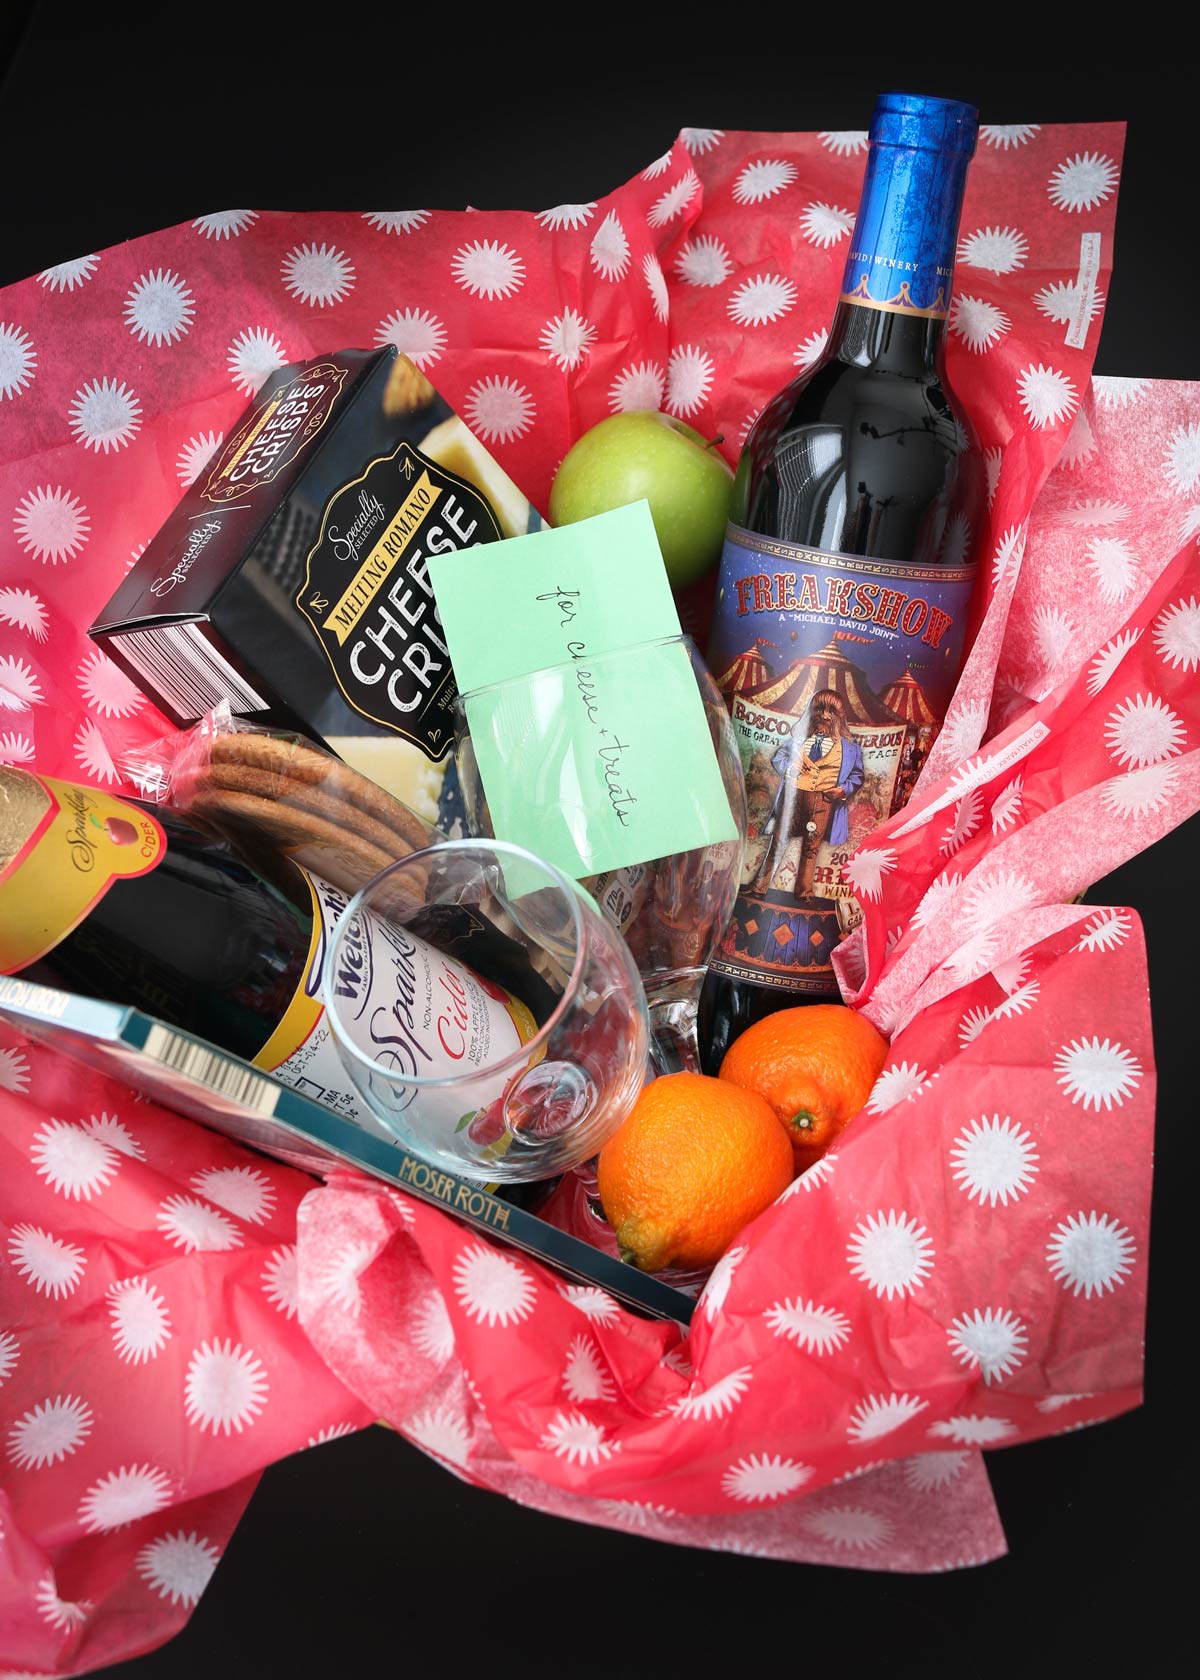 wine and cheese basket featuring wine, fruit, crackers, chocolate, cider, and a gift card for cheese.